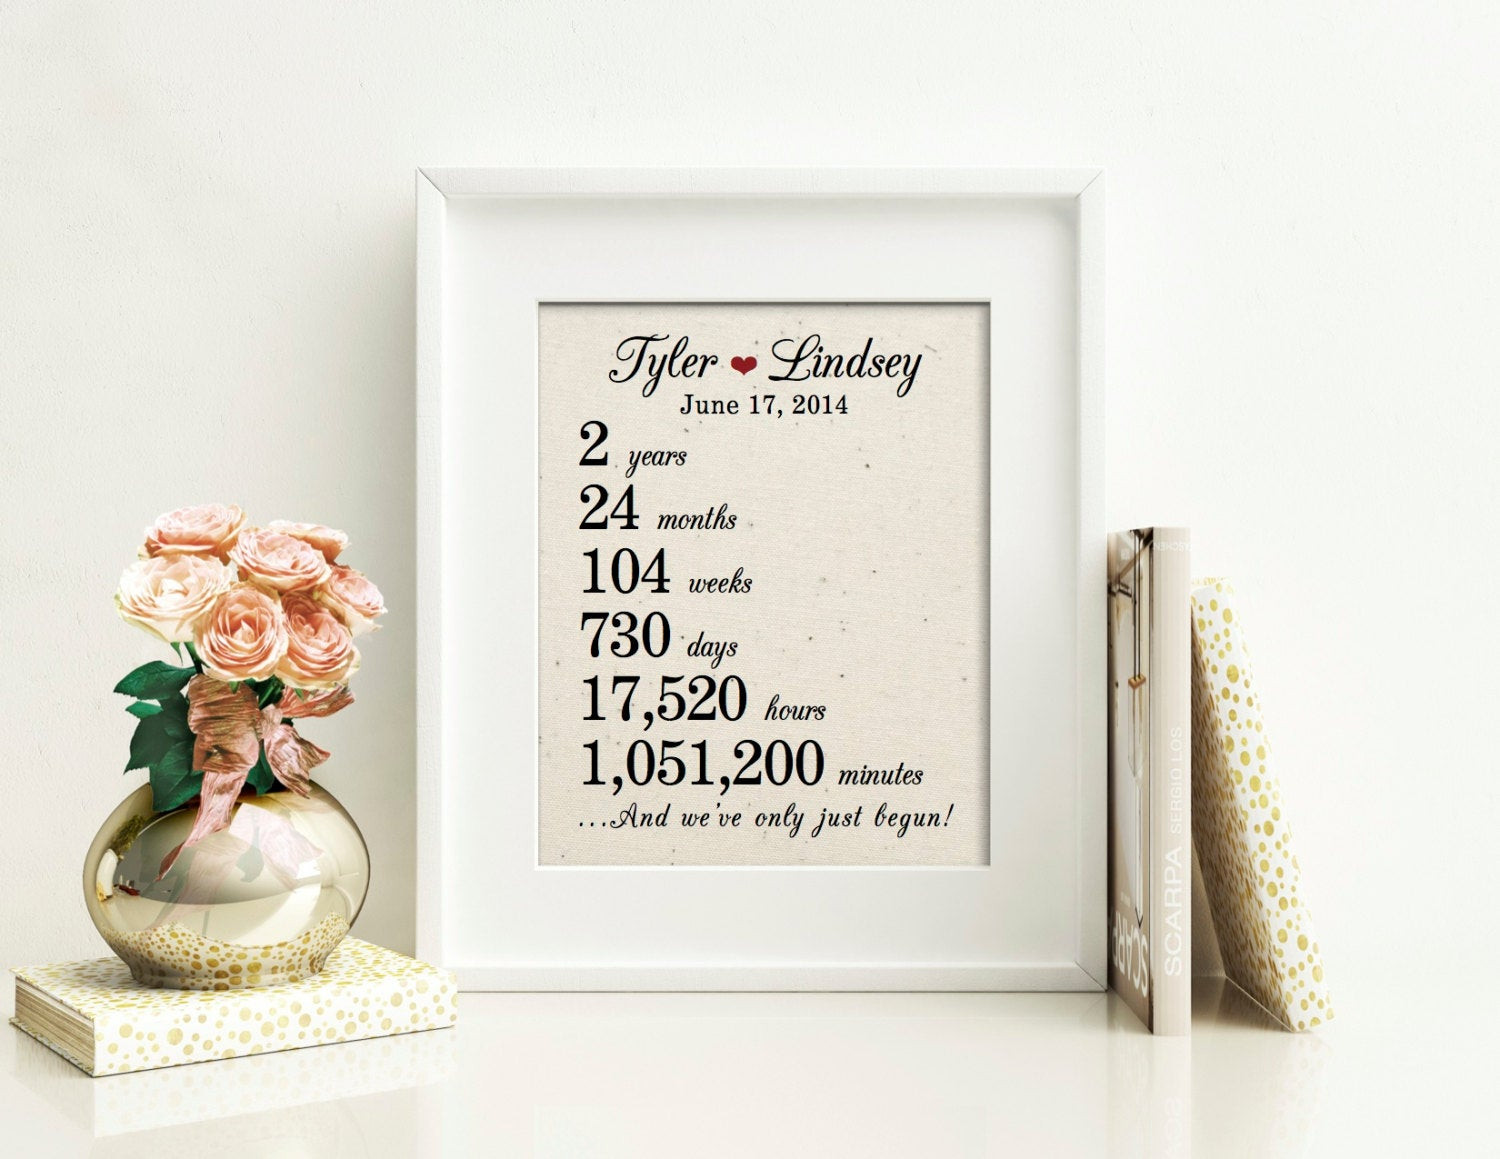 Second Wedding Anniversary Gift Ideas For Husband
 2nd Anniversary Gift Cotton Anniversary Gift for Husband